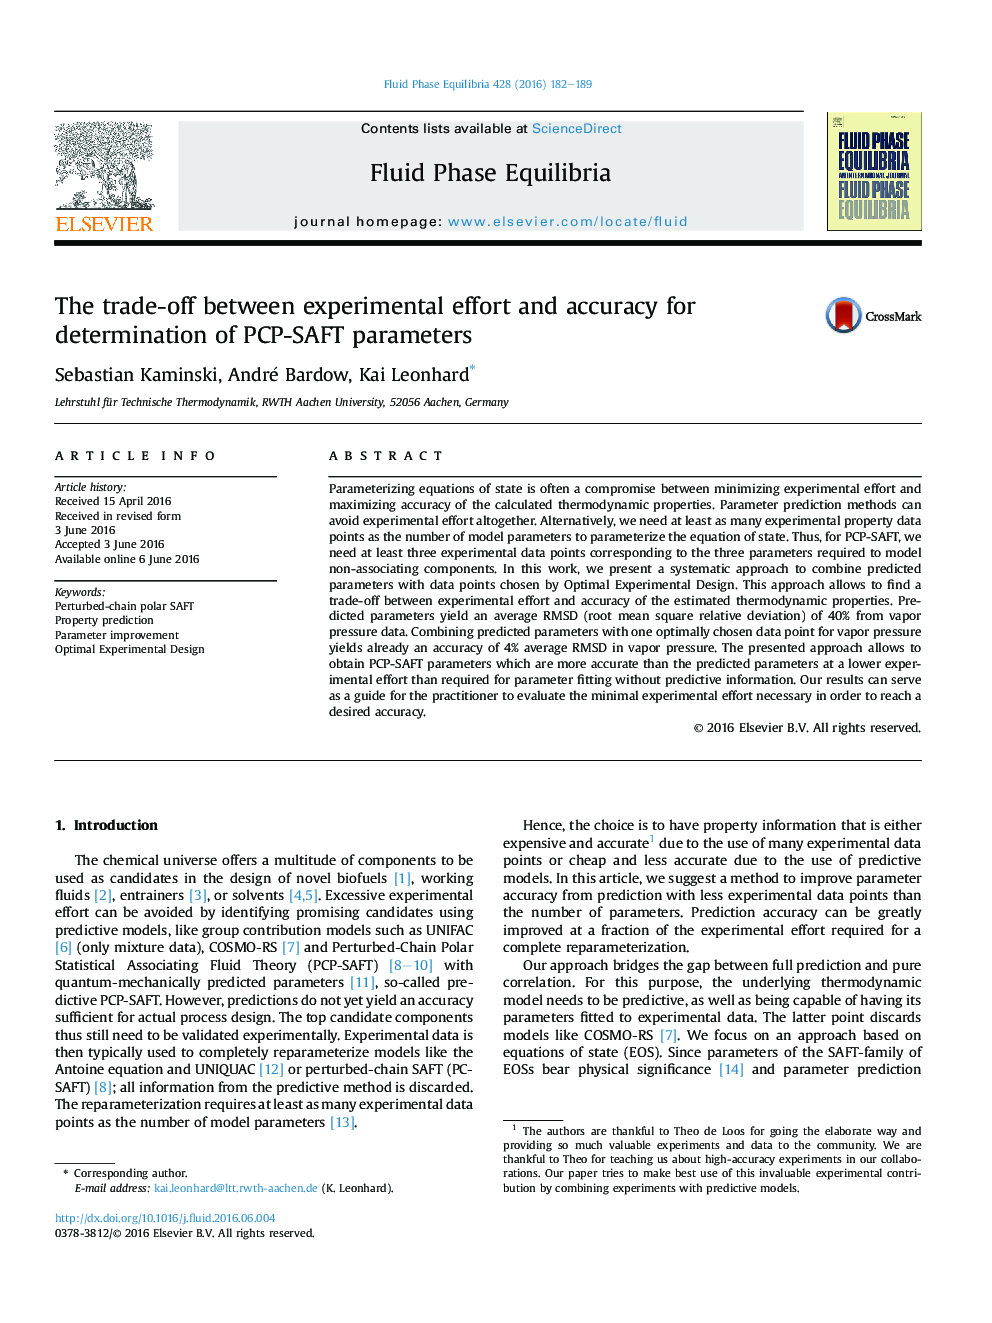 The trade-off between experimental effort and accuracy for determination of PCP-SAFT parameters